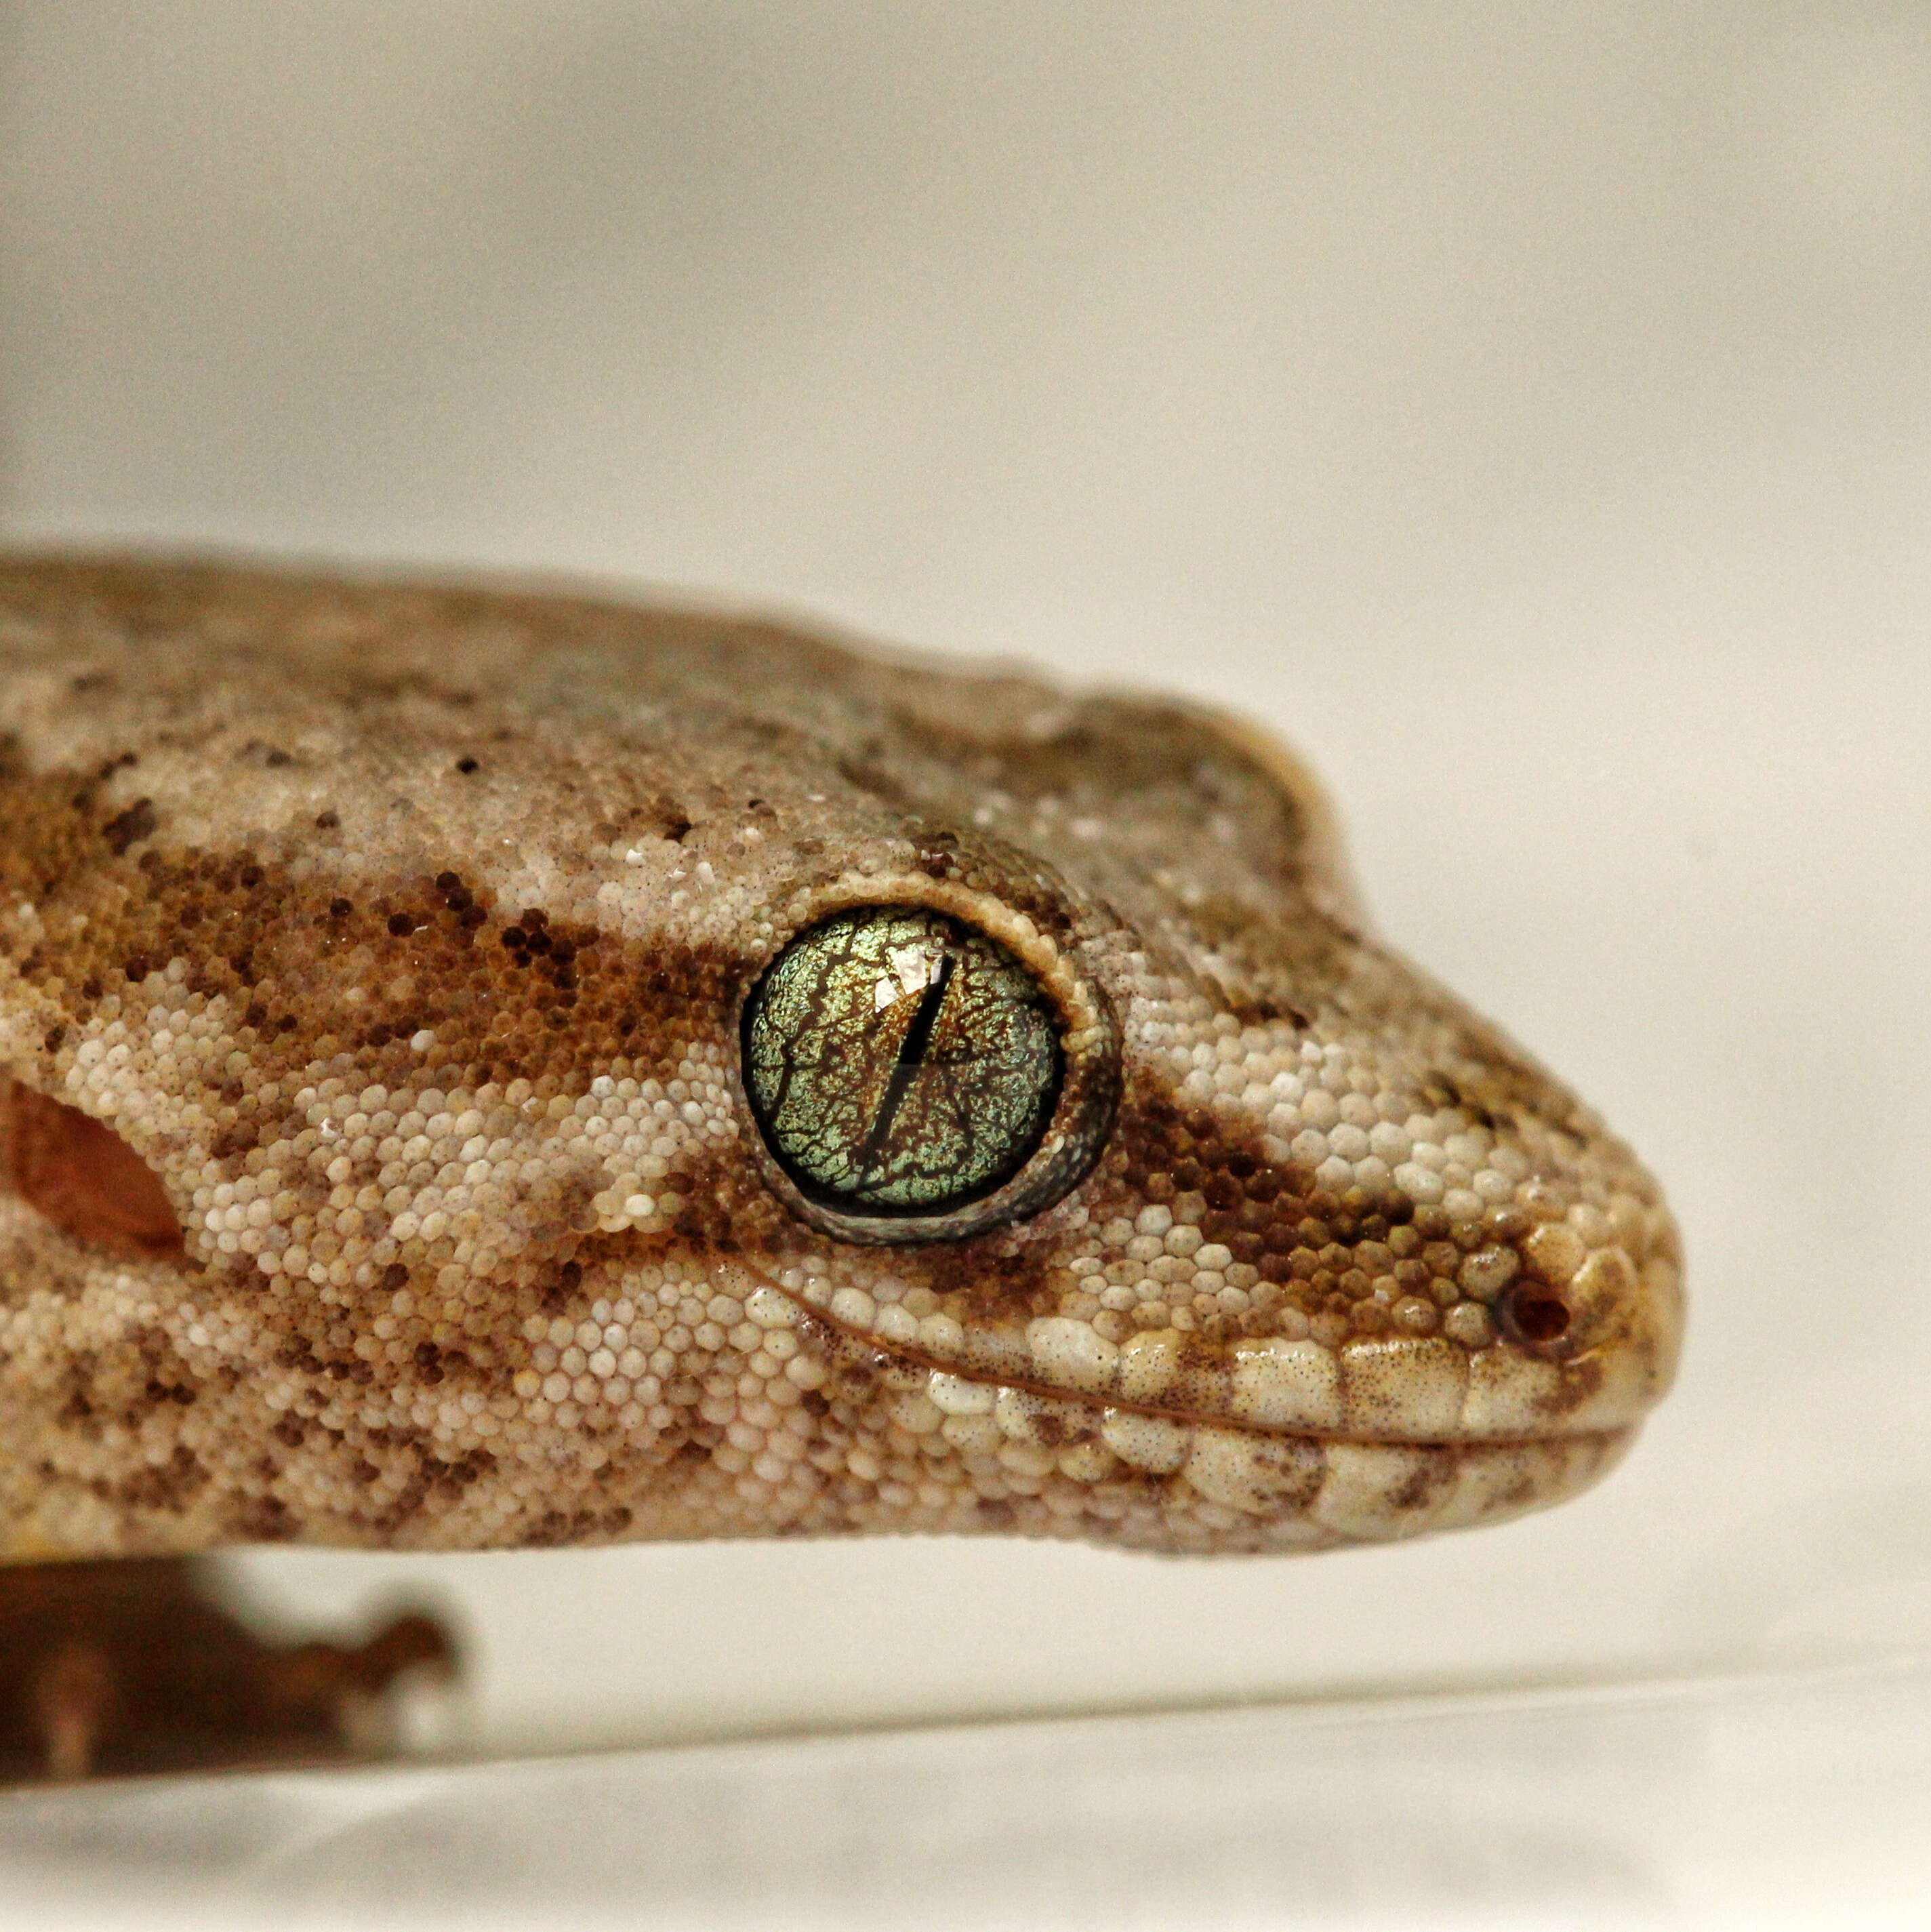 Image of Northern Sticky-toed Gecko